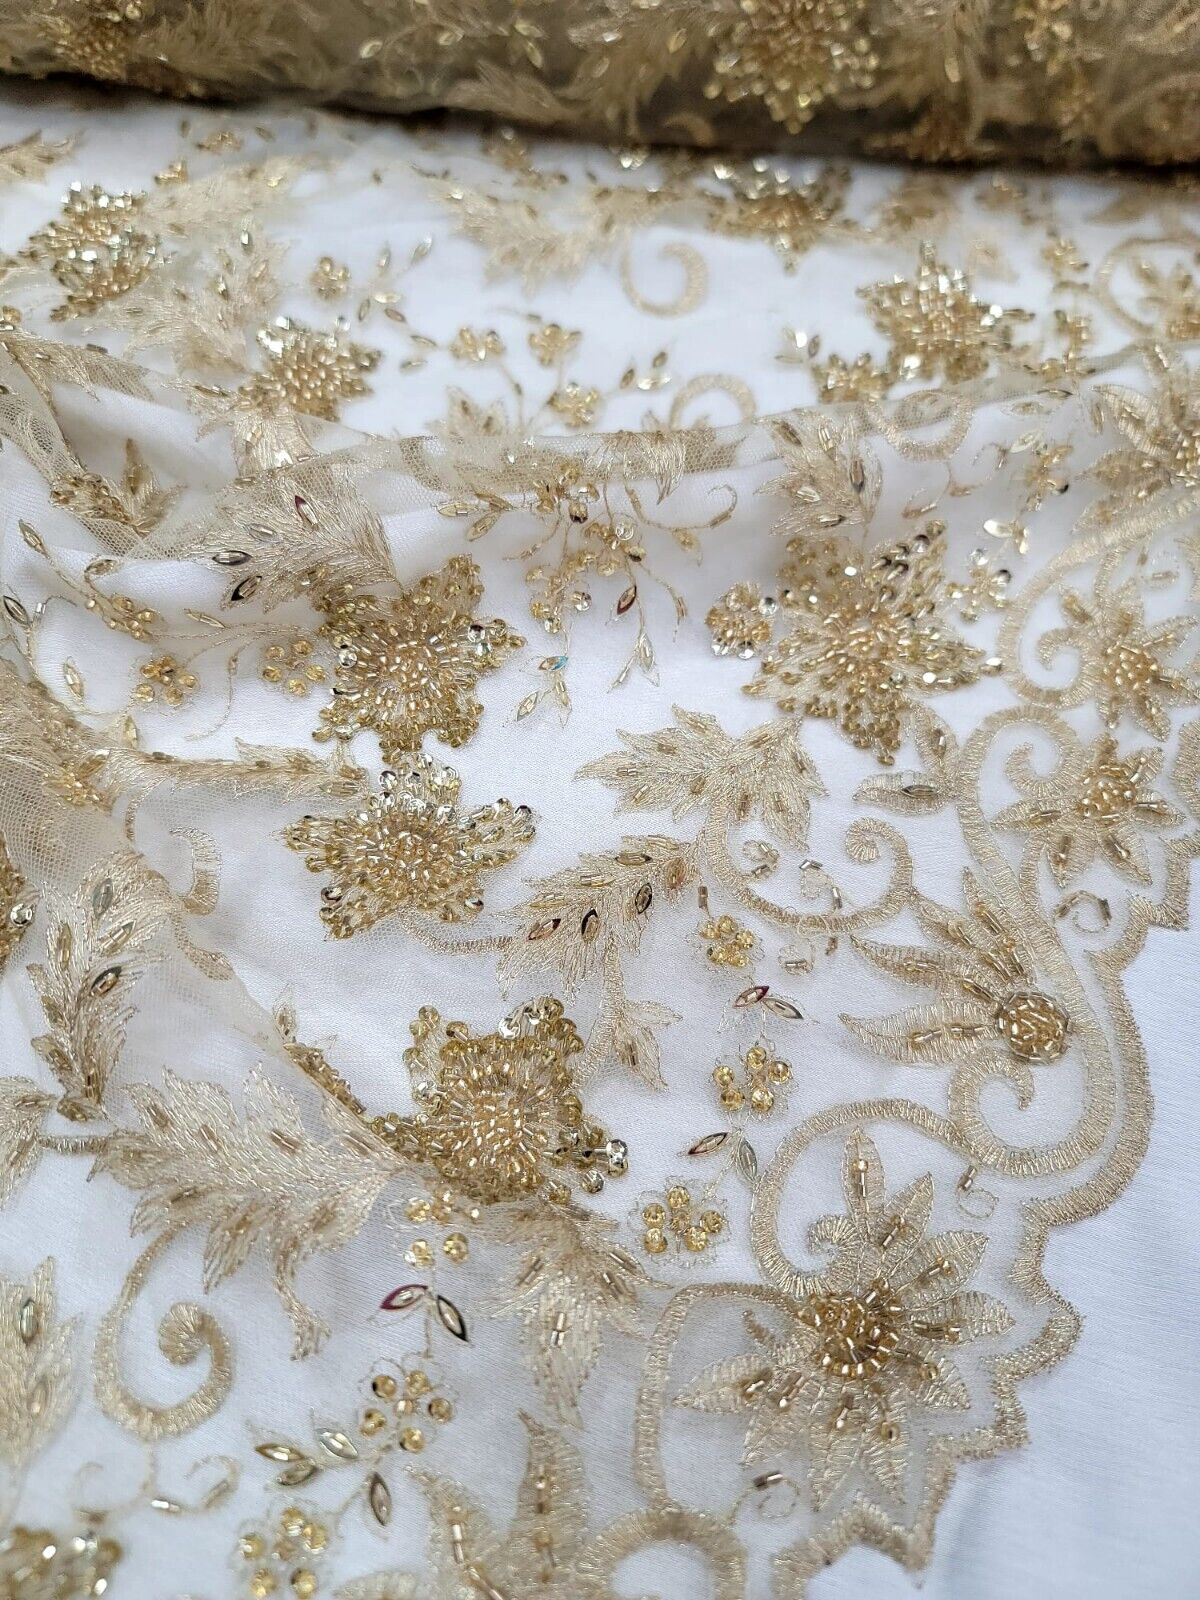 Gold Beaded Sequins Embroidery Bridal Lace Fabric Sold By The Yard Floral Lace